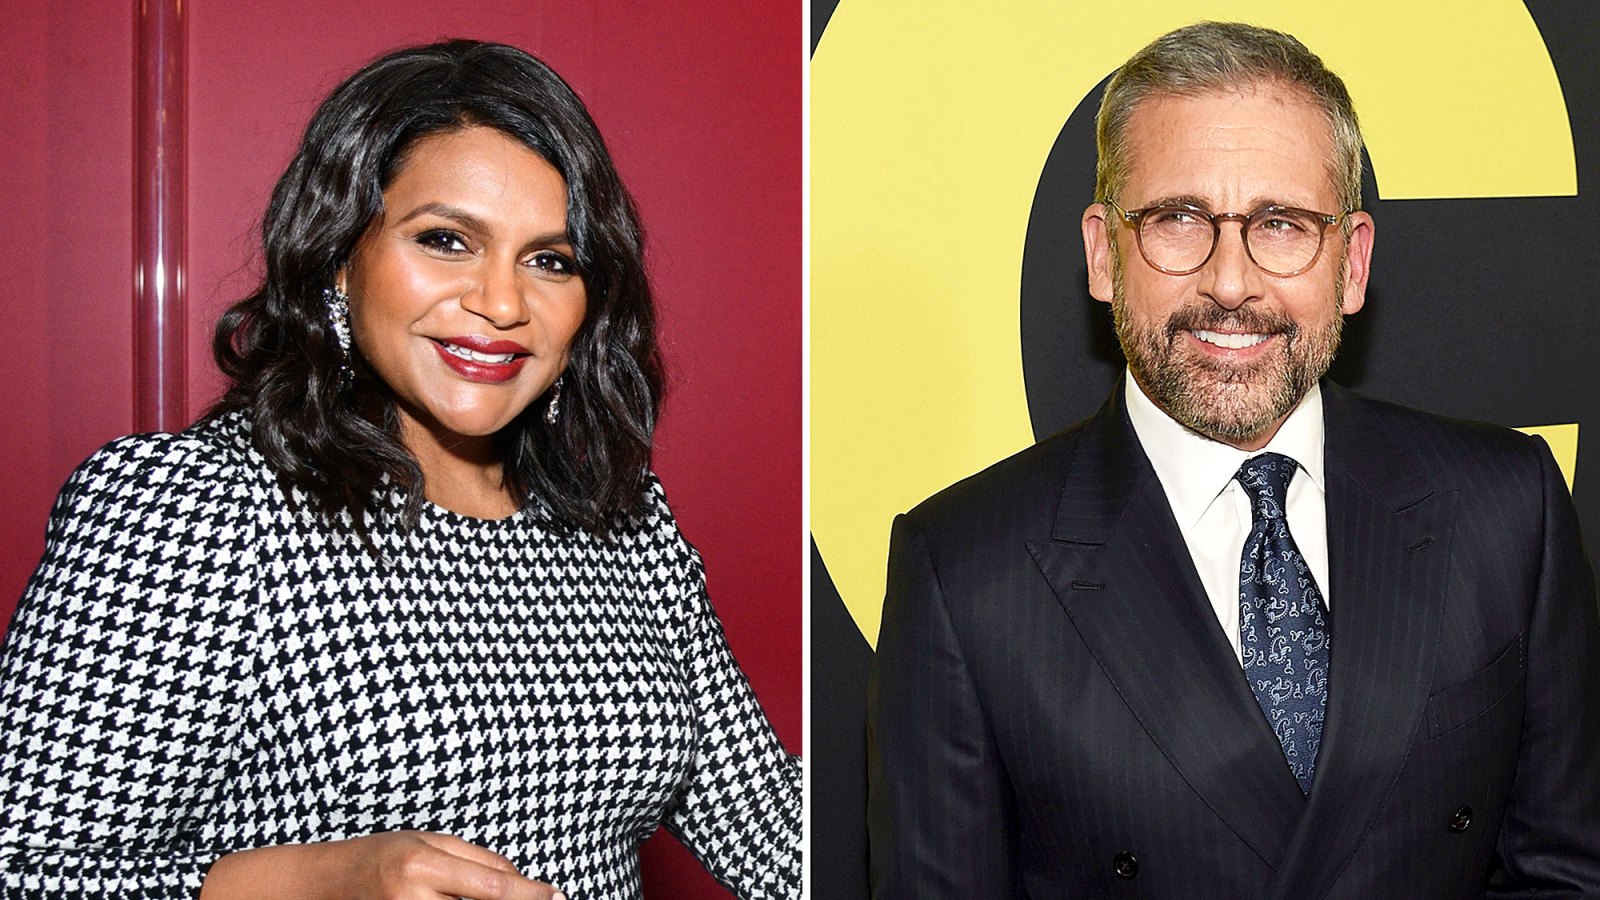 Inside Mindy Kaling and Steve Carell’s On Screen Reunion